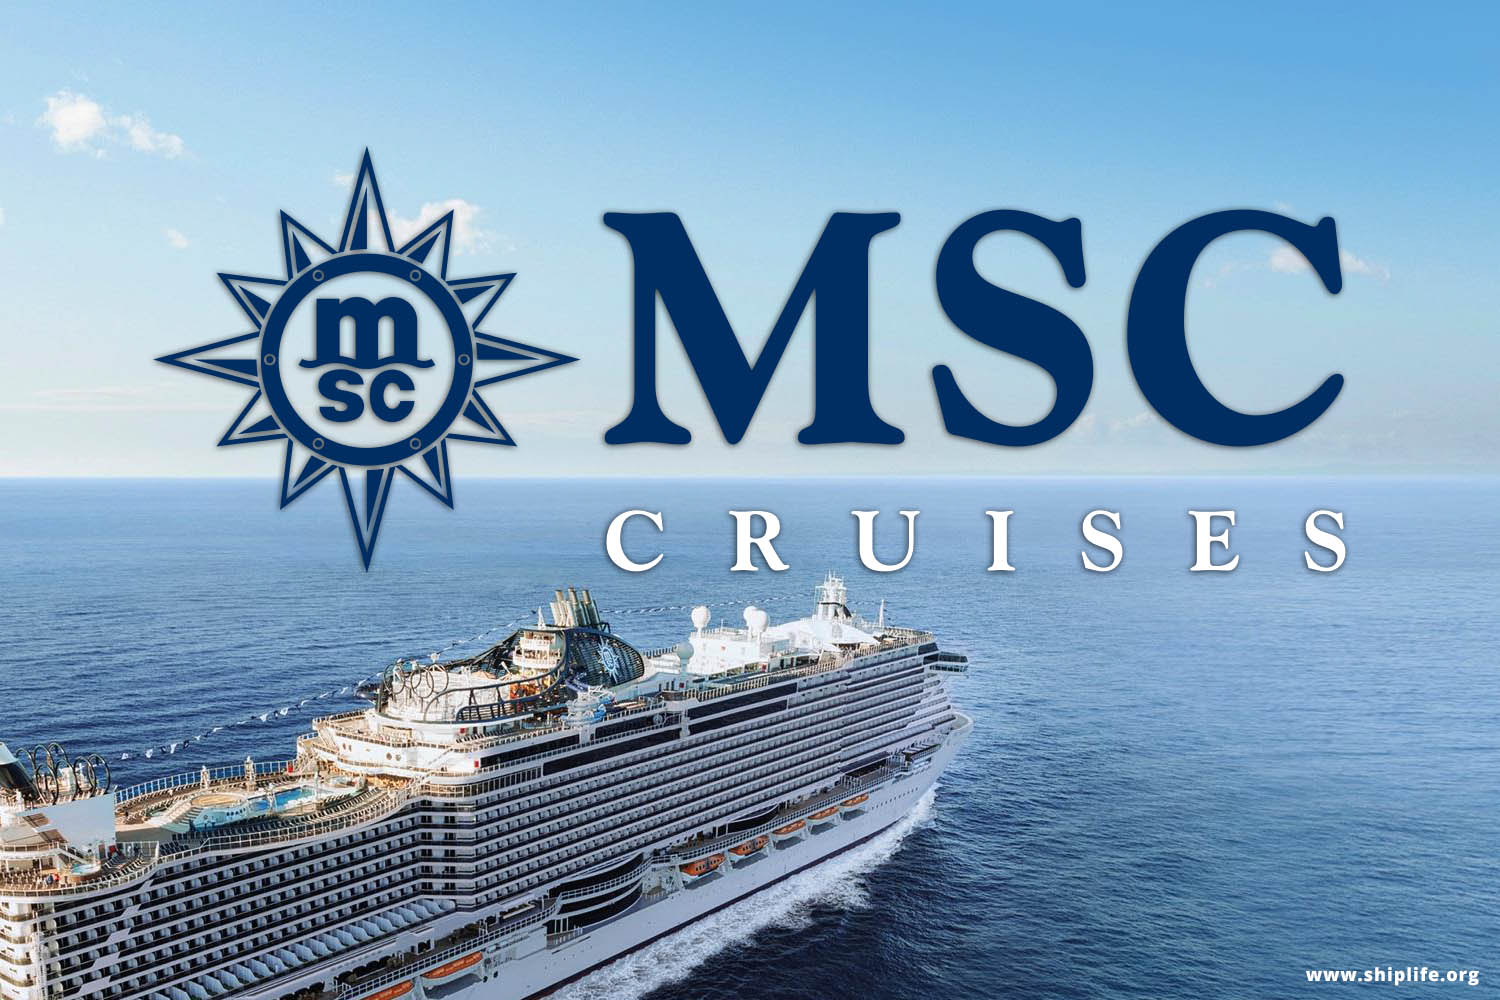 All you need to know about MSC Cruises and how to work there